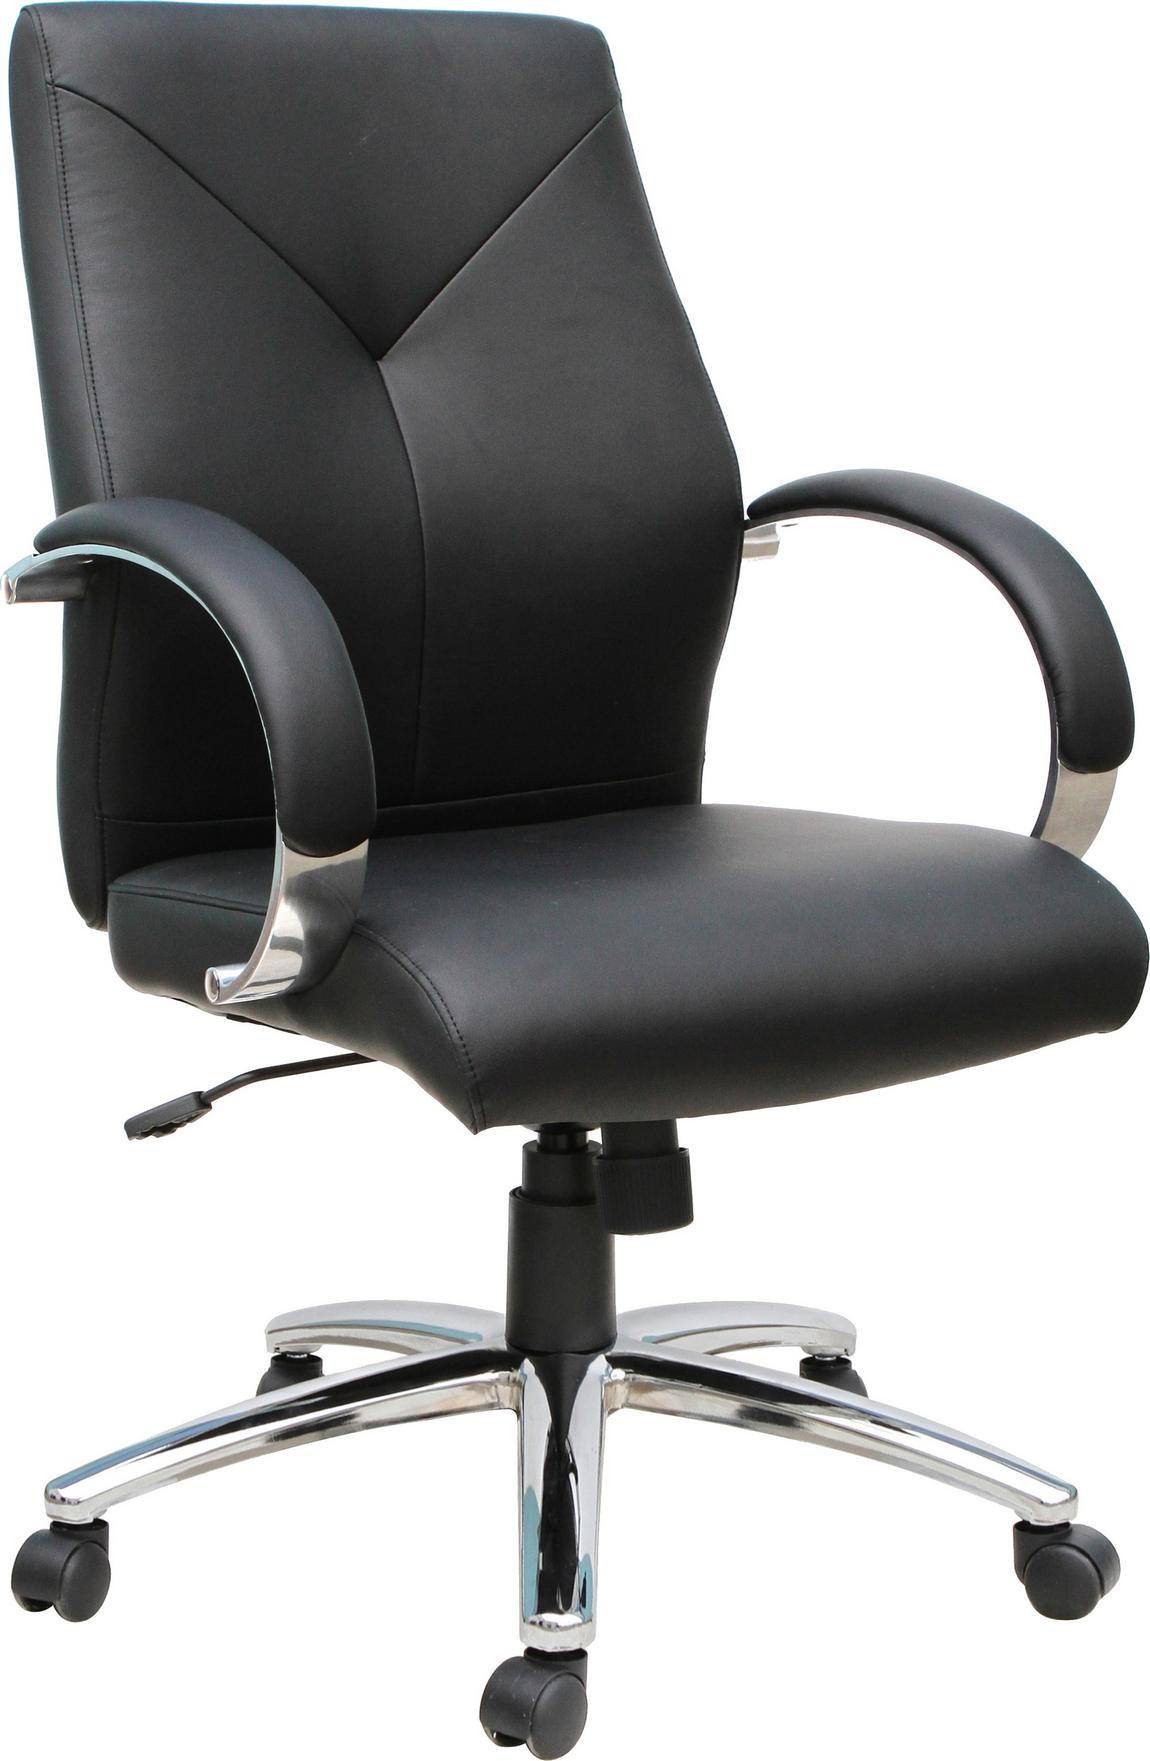 Black Modern Conference Room Chair with Arms - AQ Series